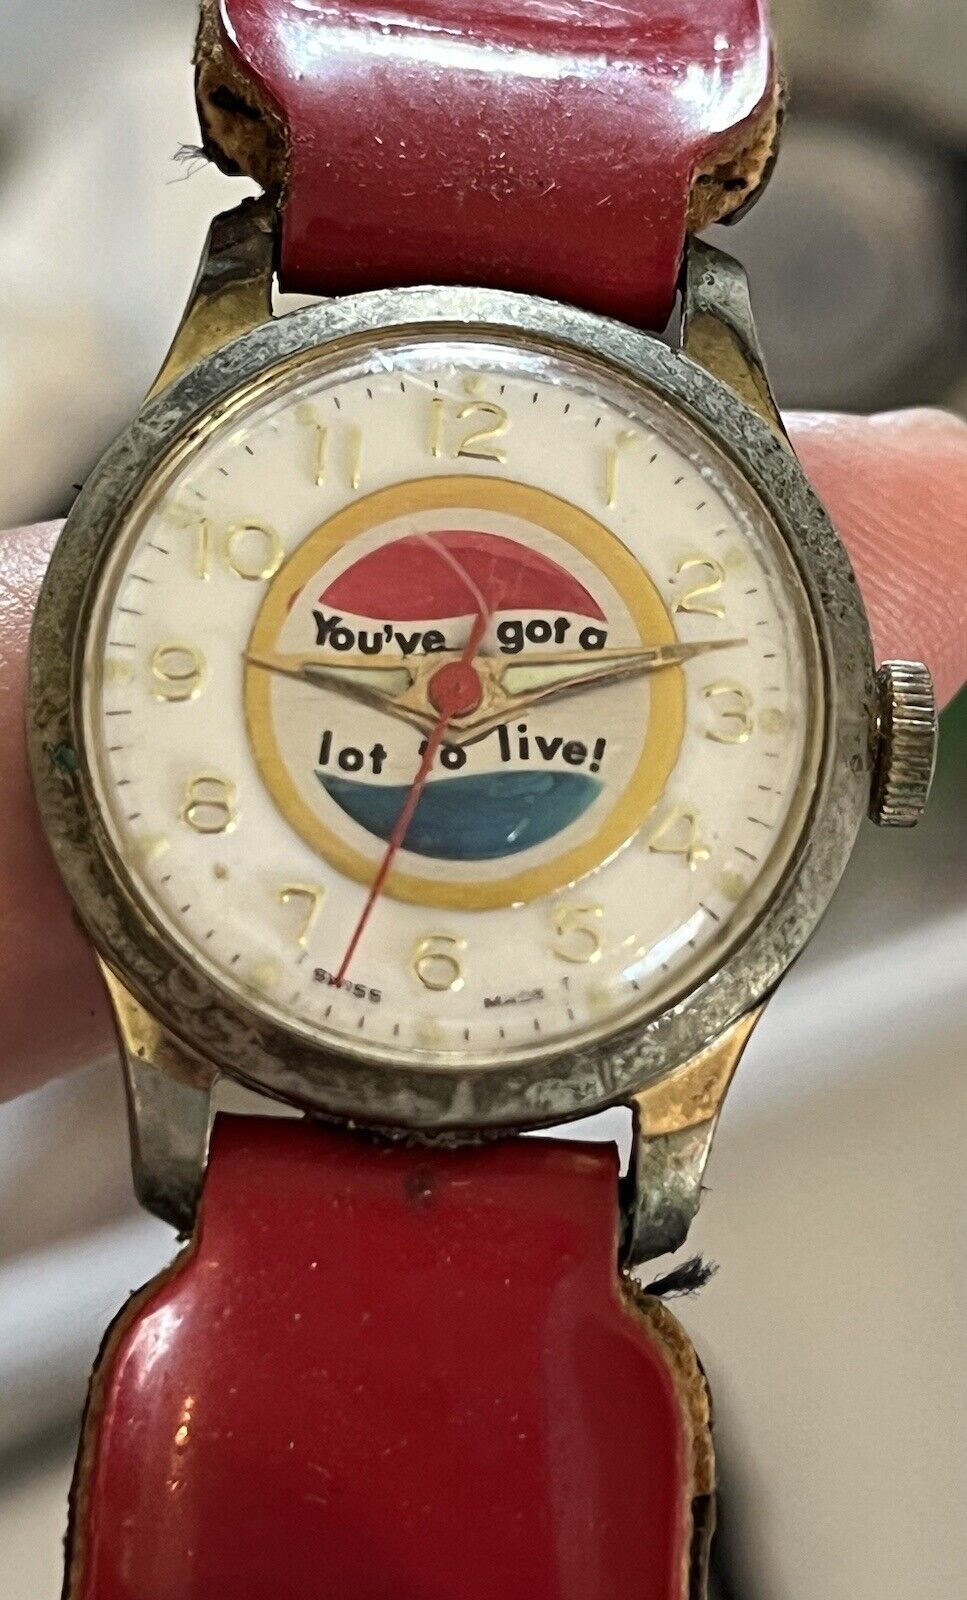 Rare Vintage Pepsi “You’ve Got A Lot To Live” Watch With Original Strap - Works